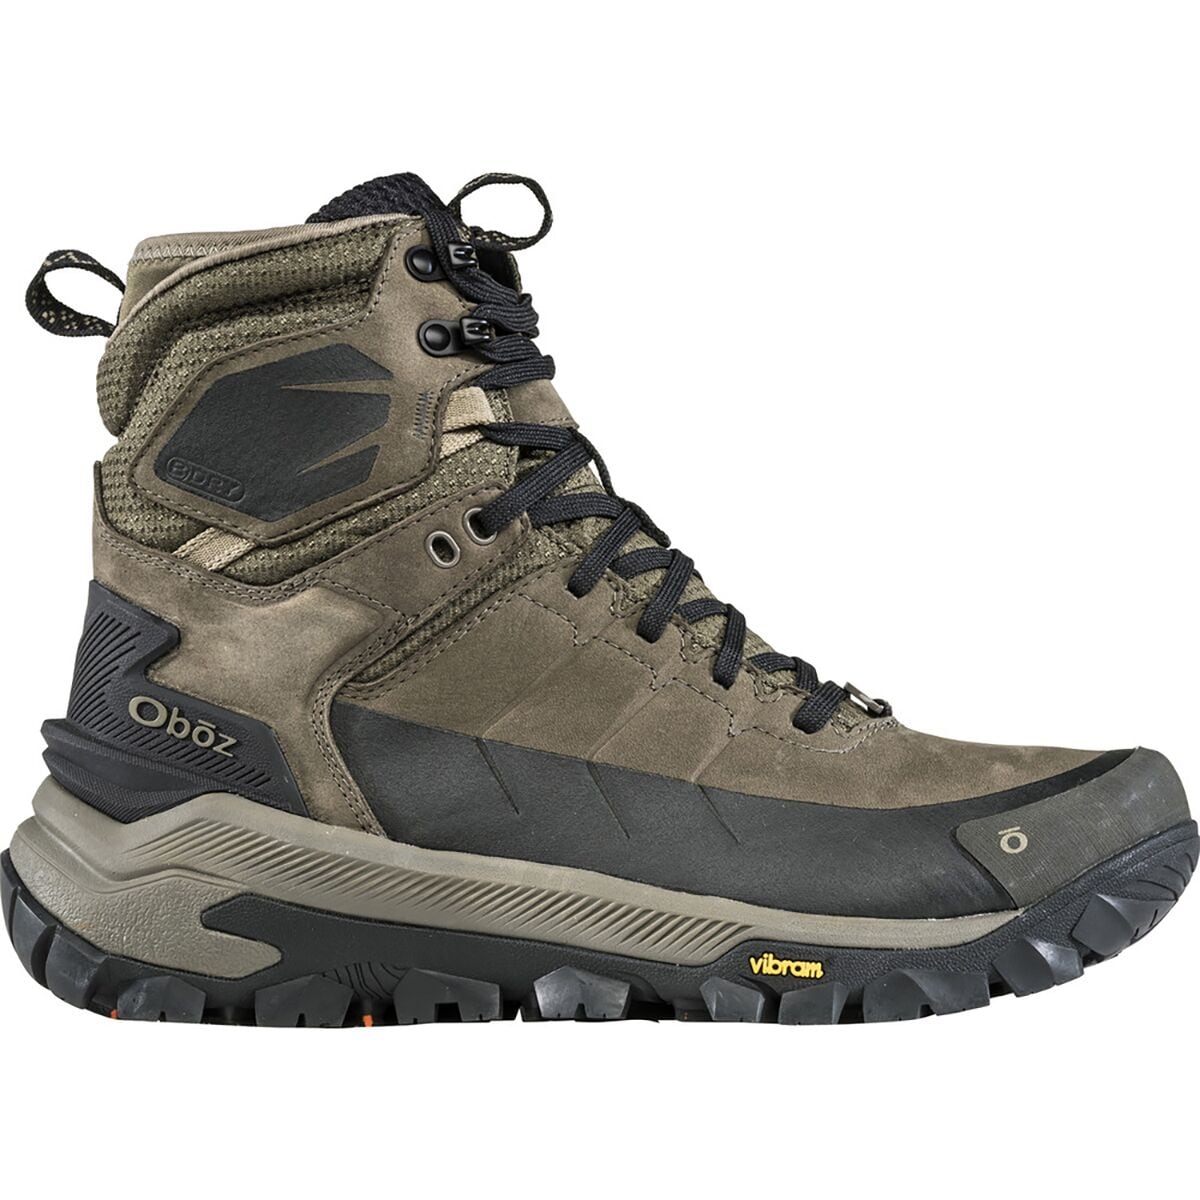 Bangtail Mid Insulated B-DRY Boot - Men